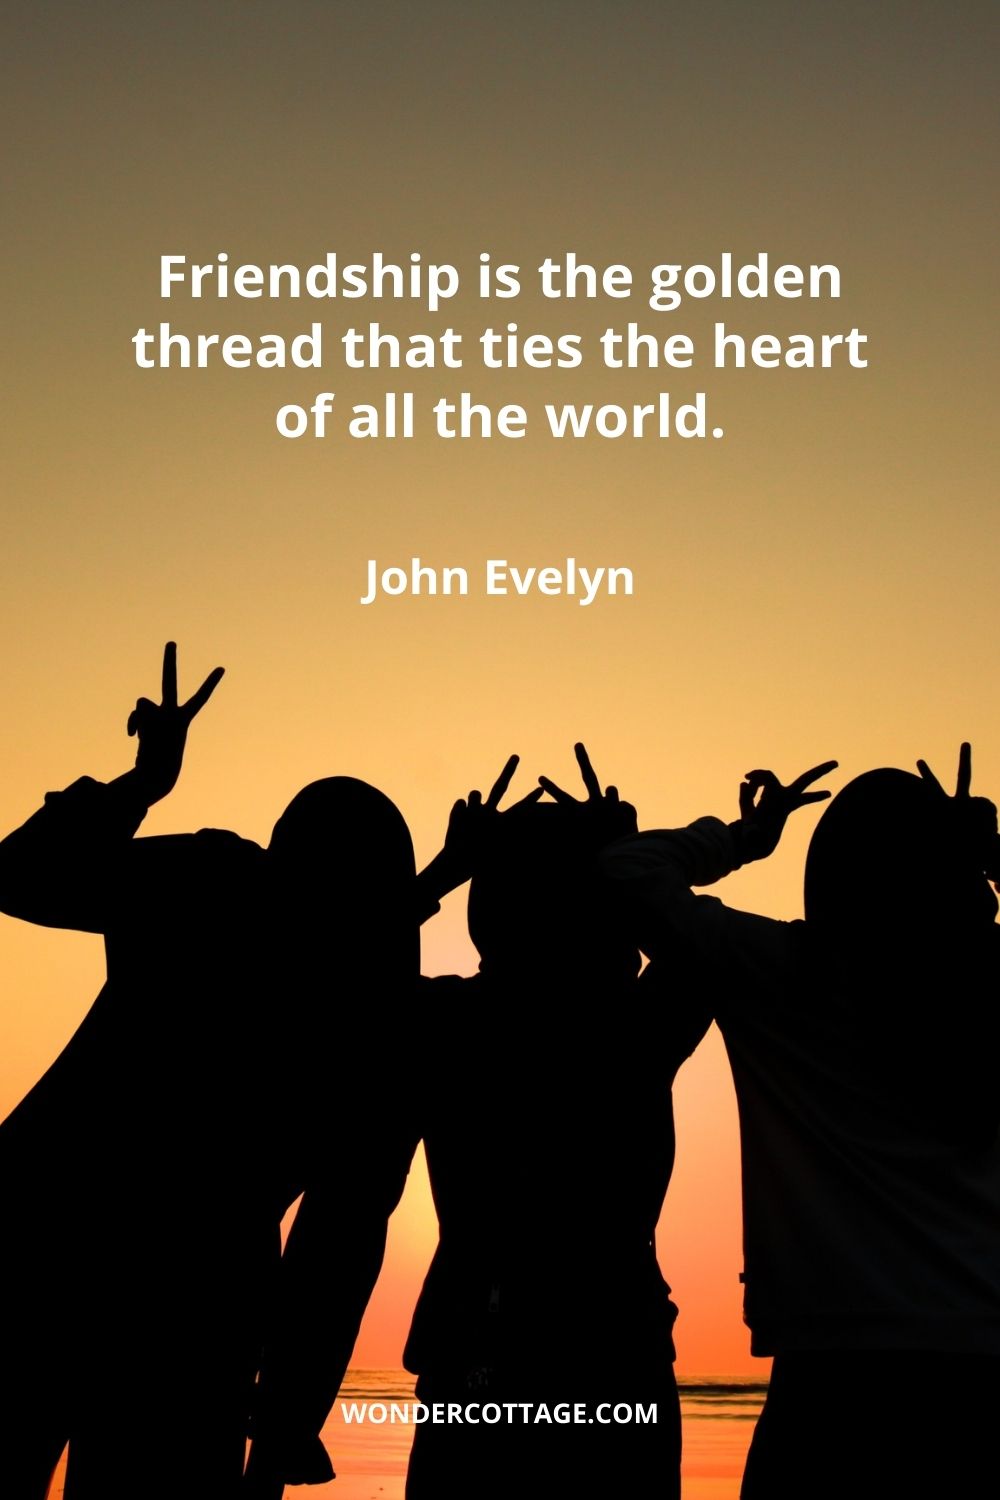 Friendship is the golden thread that ties the heart of all the world.